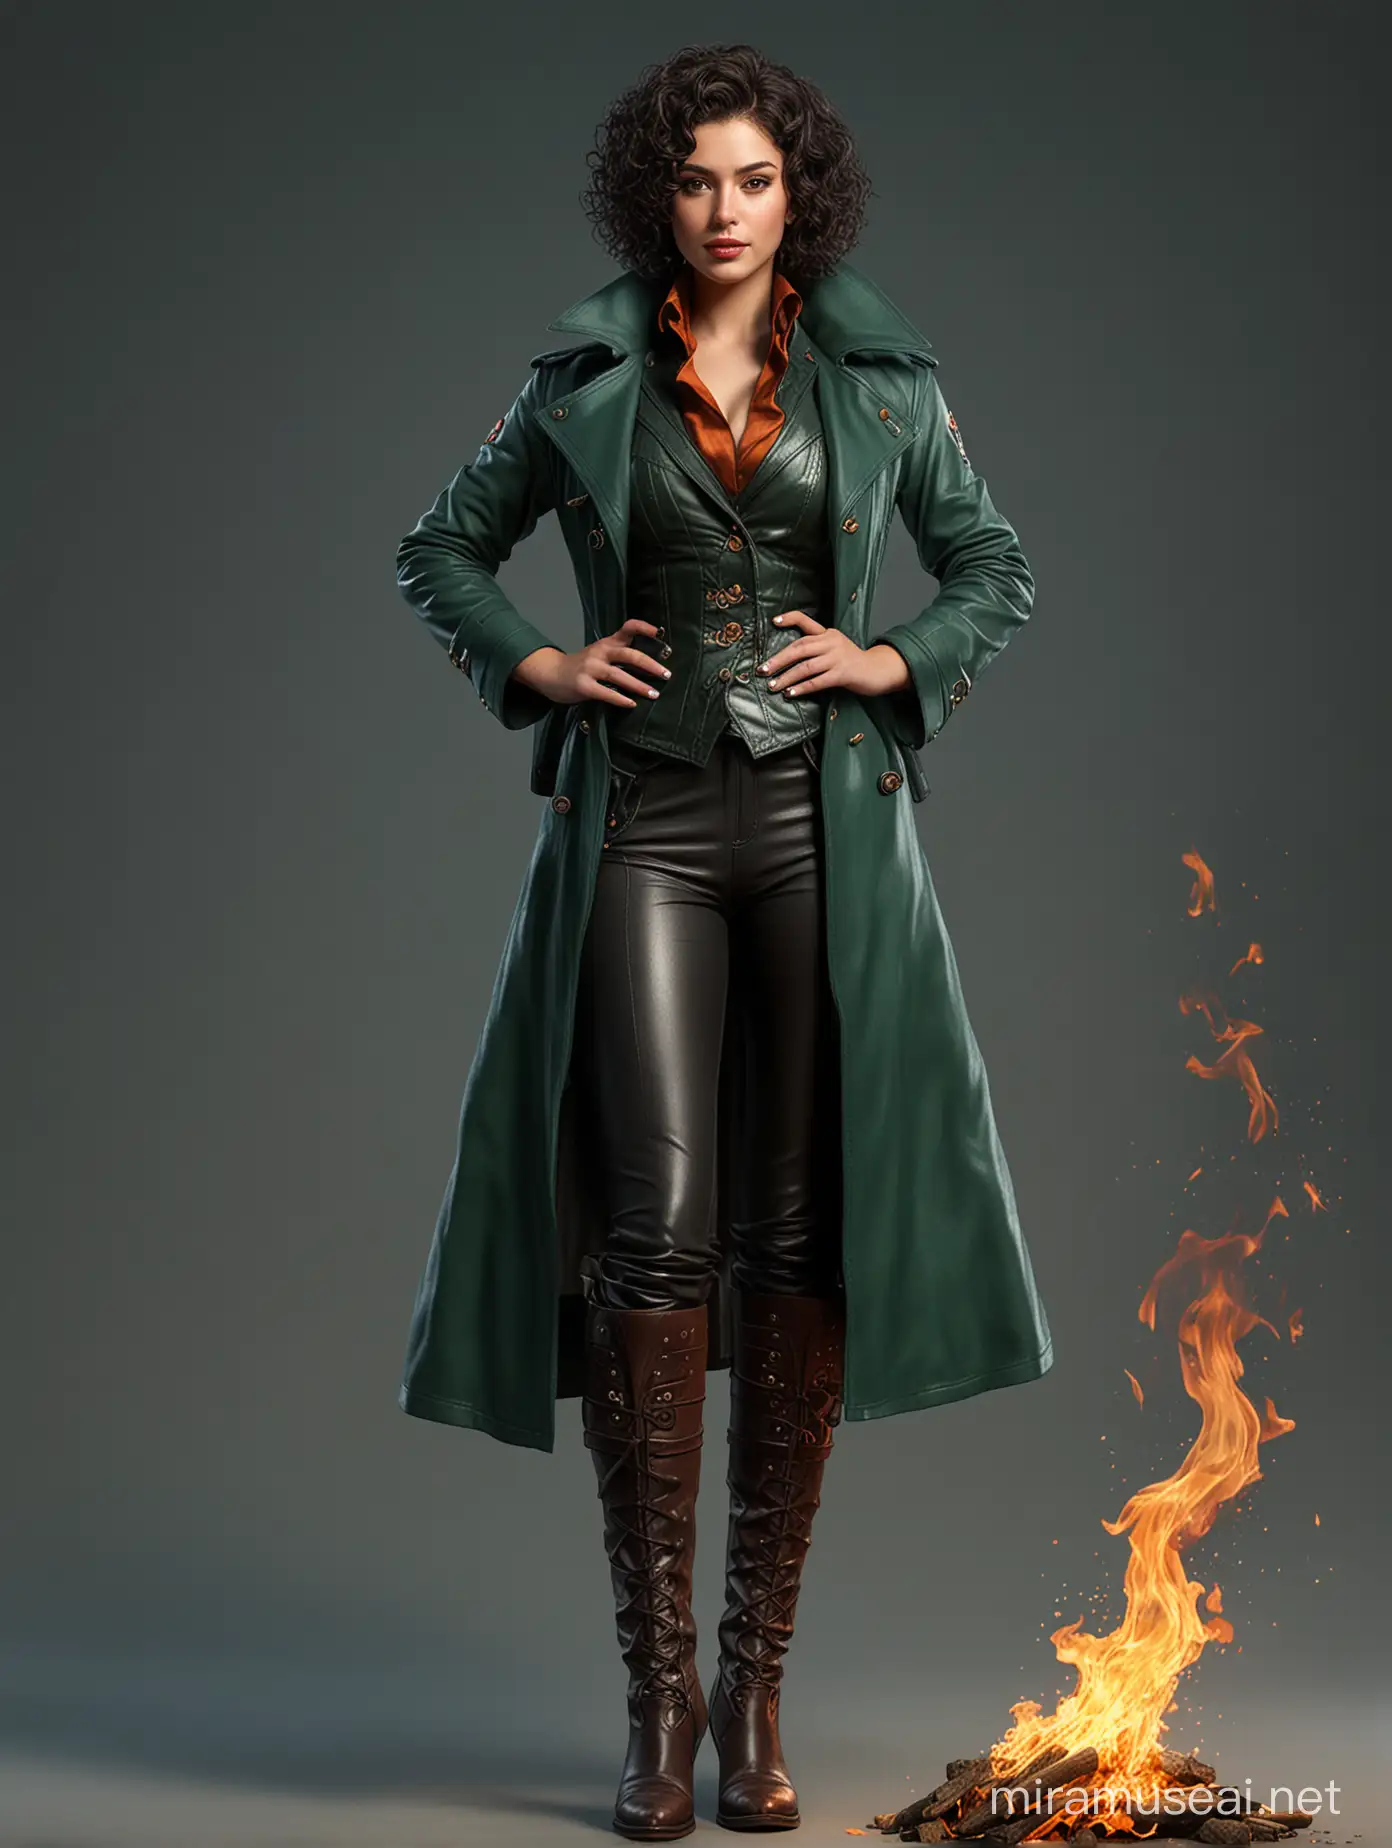 Stunning Female Fire Elementalist in Leather Boots and Dark Green Coat